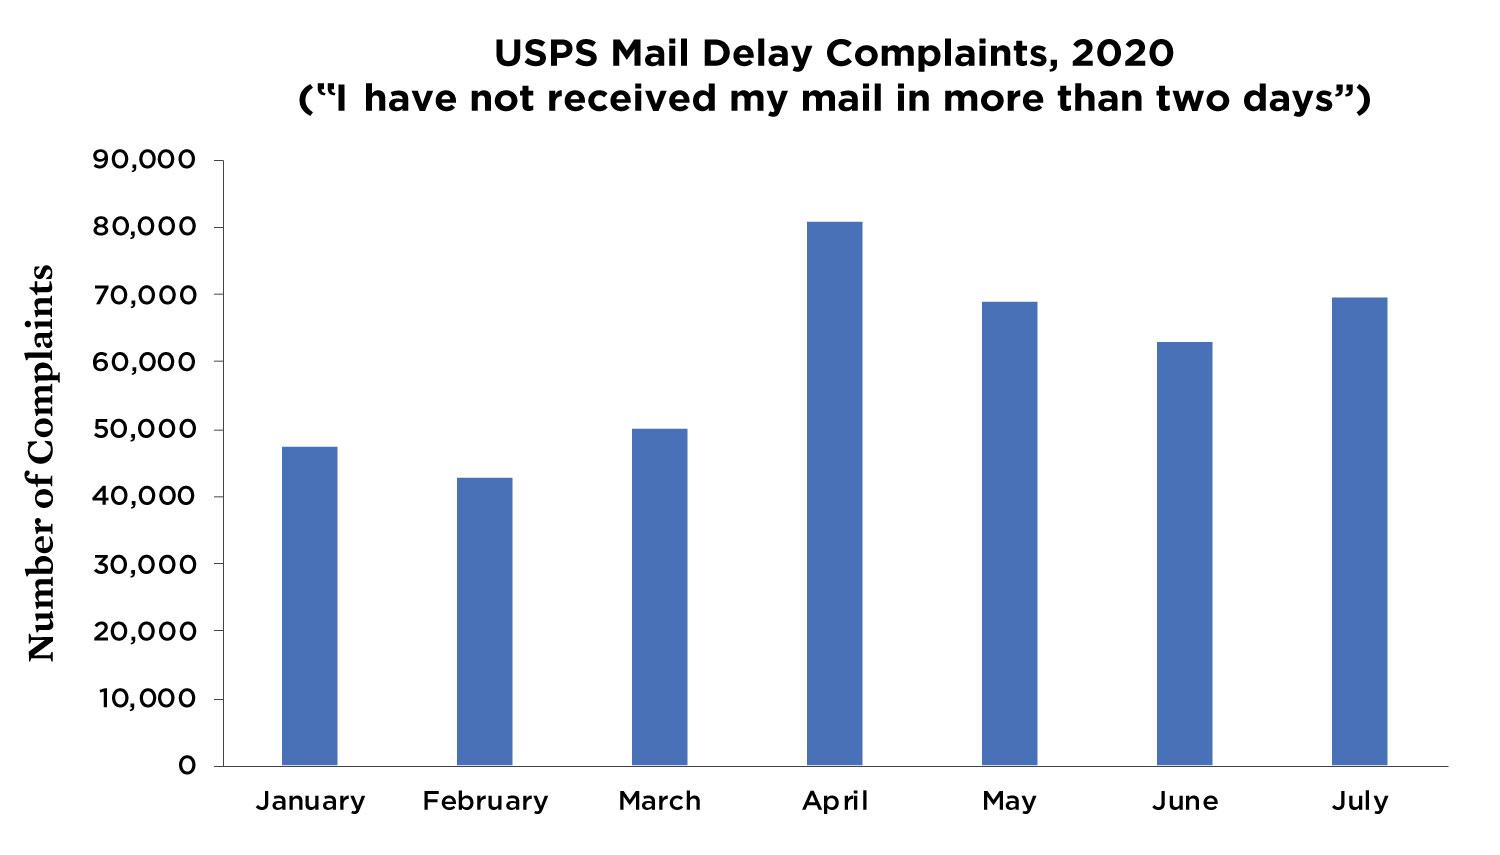 A bar graph showing mail delay complaints over time